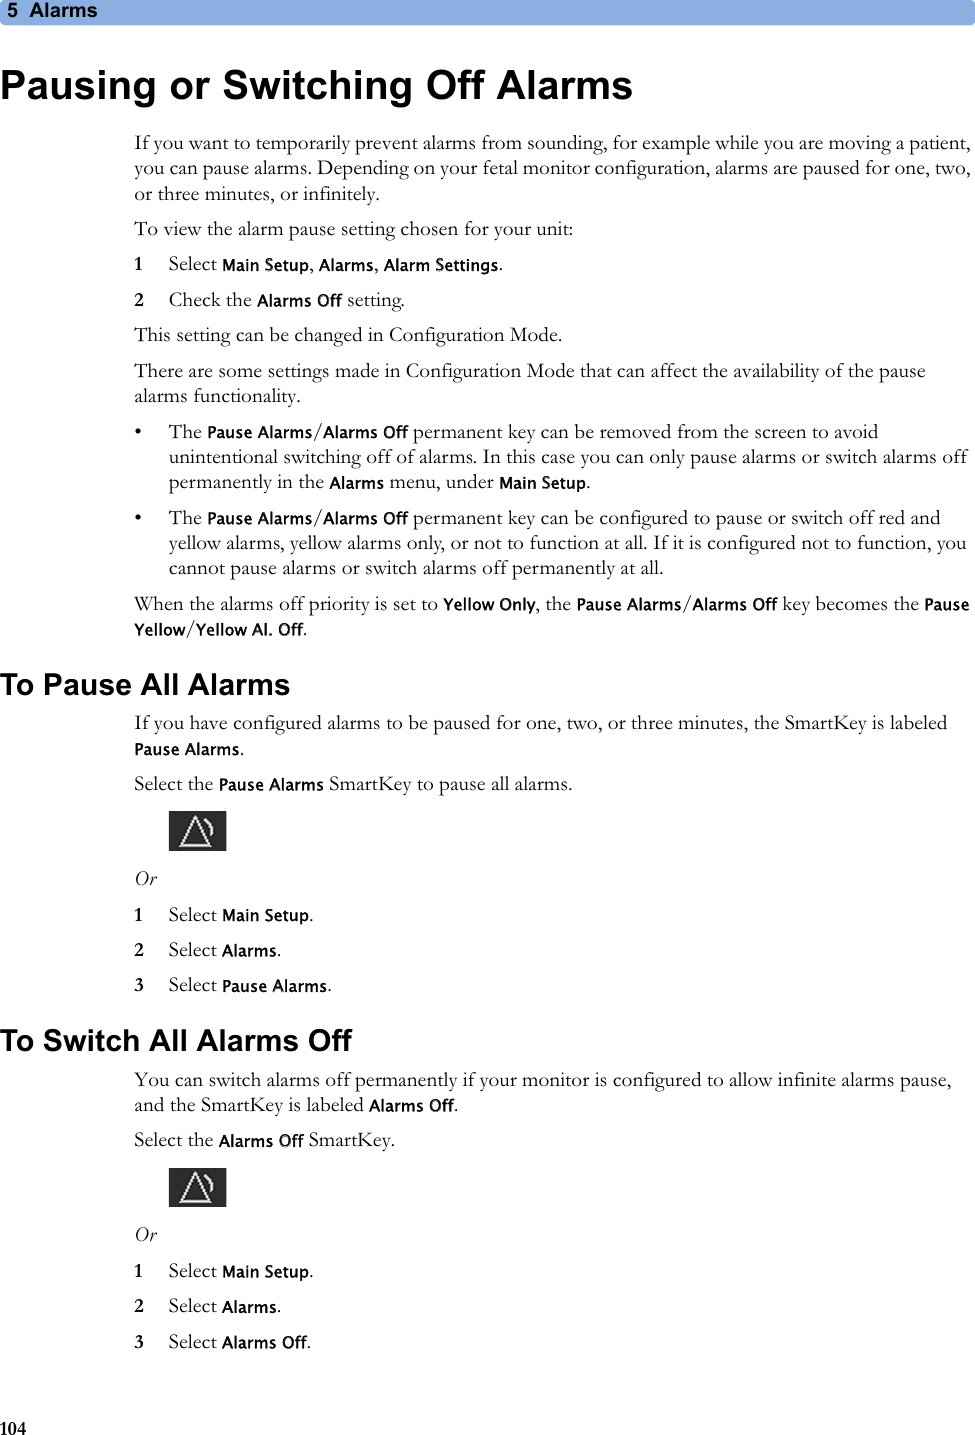 5  Alarms104Pausing or Switching Off AlarmsIf you want to temporarily prevent alarms from sounding, for example while you are moving a patient, you can pause alarms. Depending on your fetal monitor configuration, alarms are paused for one, two, or three minutes, or infinitely.To view the alarm pause setting chosen for your unit:1Select Main Setup, Alarms, Alarm Settings.2Check the Alarms Off setting.This setting can be changed in Configuration Mode.There are some settings made in Configuration Mode that can affect the availability of the pause alarms functionality.• The Pause Alarms/Alarms Off permanent key can be removed from the screen to avoid unintentional switching off of alarms. In this case you can only pause alarms or switch alarms off permanently in the Alarms menu, under Main Setup.• The Pause Alarms/Alarms Off permanent key can be configured to pause or switch off red and yellow alarms, yellow alarms only, or not to function at all. If it is configured not to function, you cannot pause alarms or switch alarms off permanently at all.When the alarms off priority is set to Yellow Only, the Pause Alarms/Alarms Off key becomes the Pause Yellow/Yellow Al. Off.To Pause All AlarmsIf you have configured alarms to be paused for one, two, or three minutes, the SmartKey is labeled Pause Alarms.Select the Pause Alarms SmartKey to pause all alarms.Or1Select Main Setup.2Select Alarms.3Select Pause Alarms.To Switch All Alarms OffYou can switch alarms off permanently if your monitor is configured to allow infinite alarms pause, and the SmartKey is labeled Alarms Off.Select the Alarms Off SmartKey.Or1Select Main Setup.2Select Alarms.3Select Alarms Off.